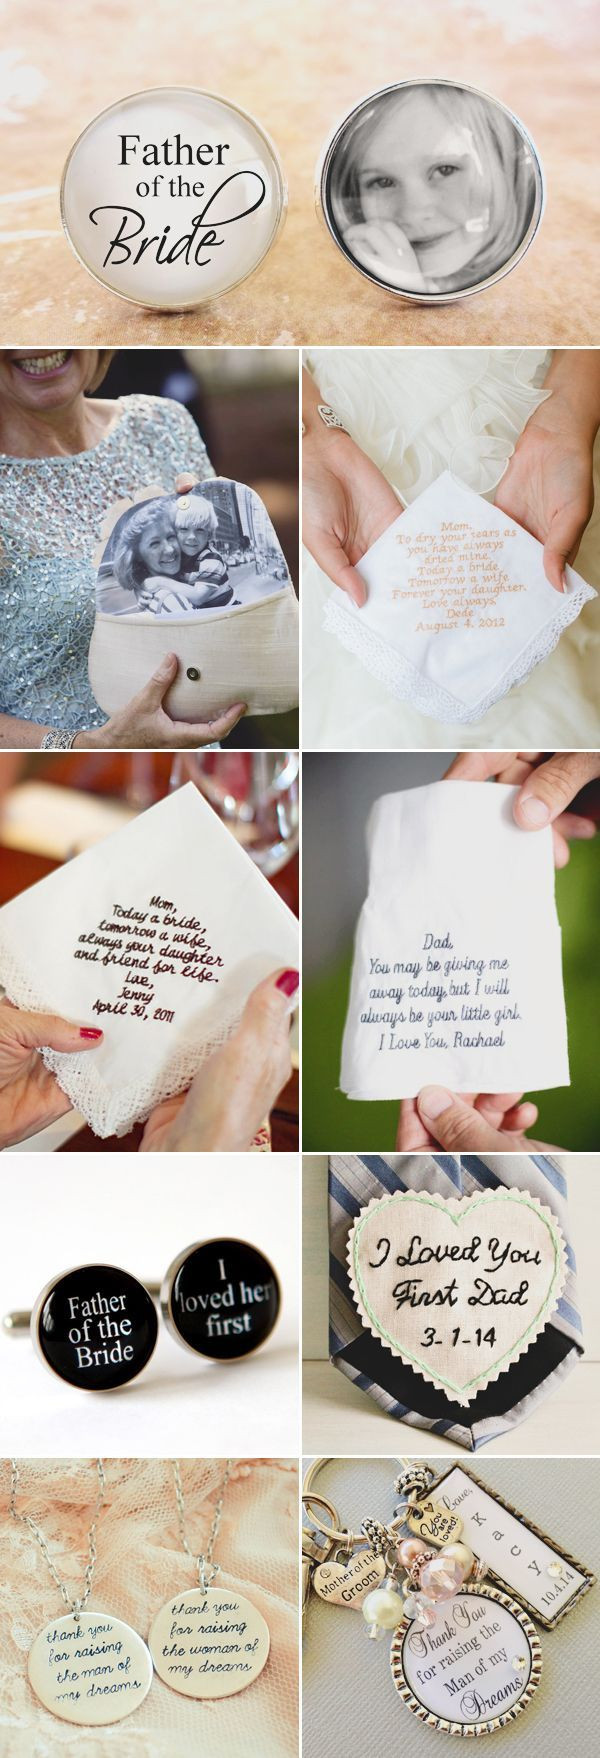 Engagement Party Gift Ideas From Parents
 27 Creative Ways to Honor Your Parents at Your Wedding